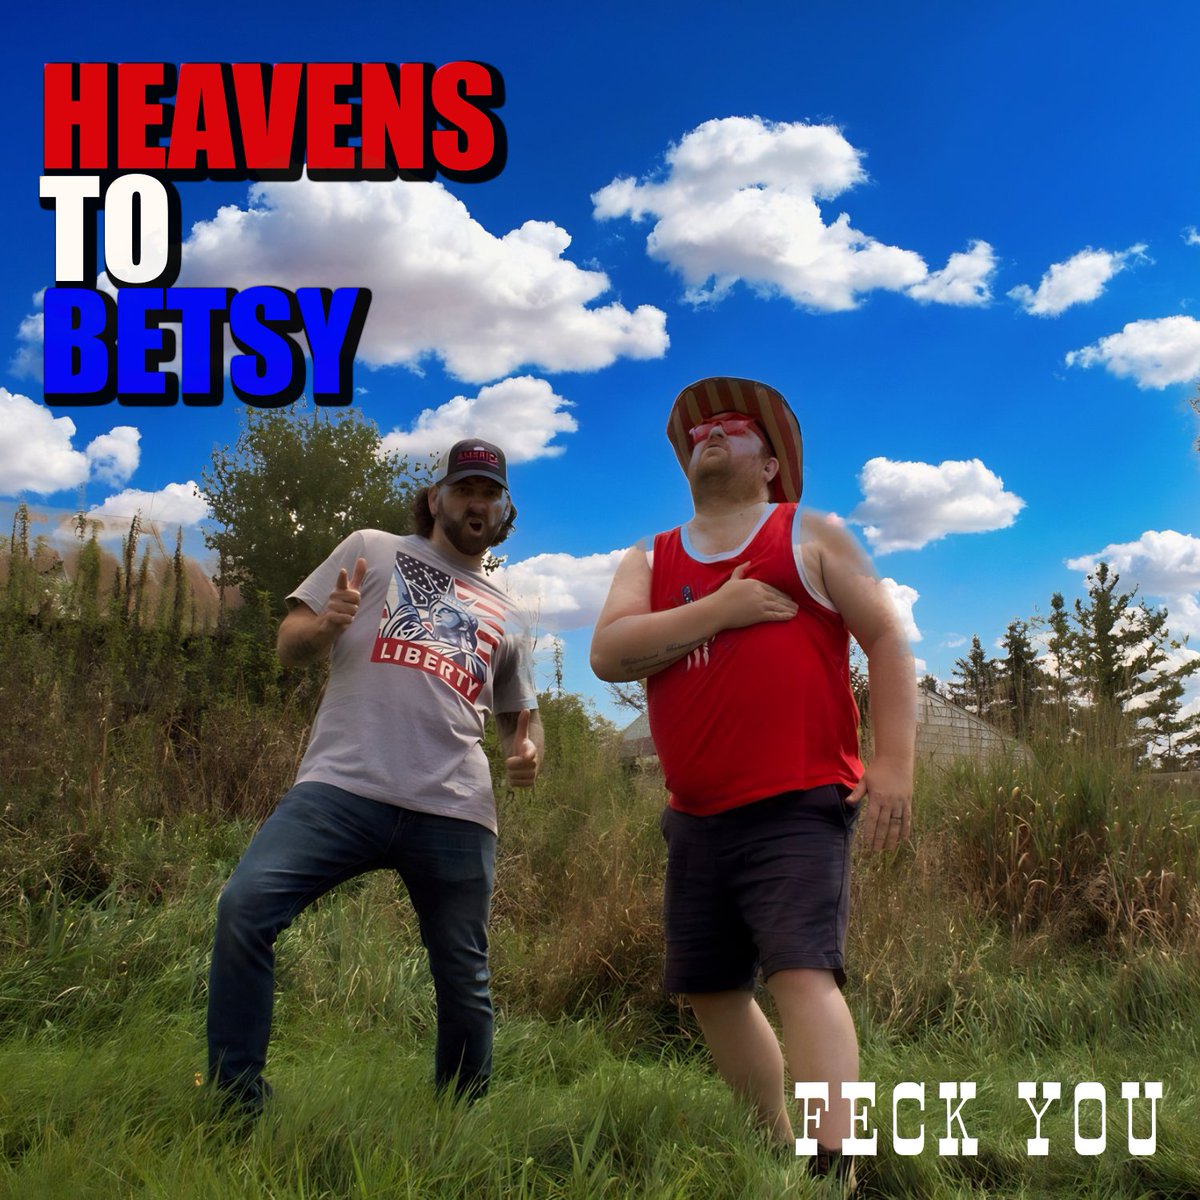 We give you the cover art for our new single, which will be available on all streaming platforms on 11/10. Murica! 

#countrymusic #countryrock #outlawcountry #newmusic #newsingle #newsong #honkytonk #comedymusic #americanmusic